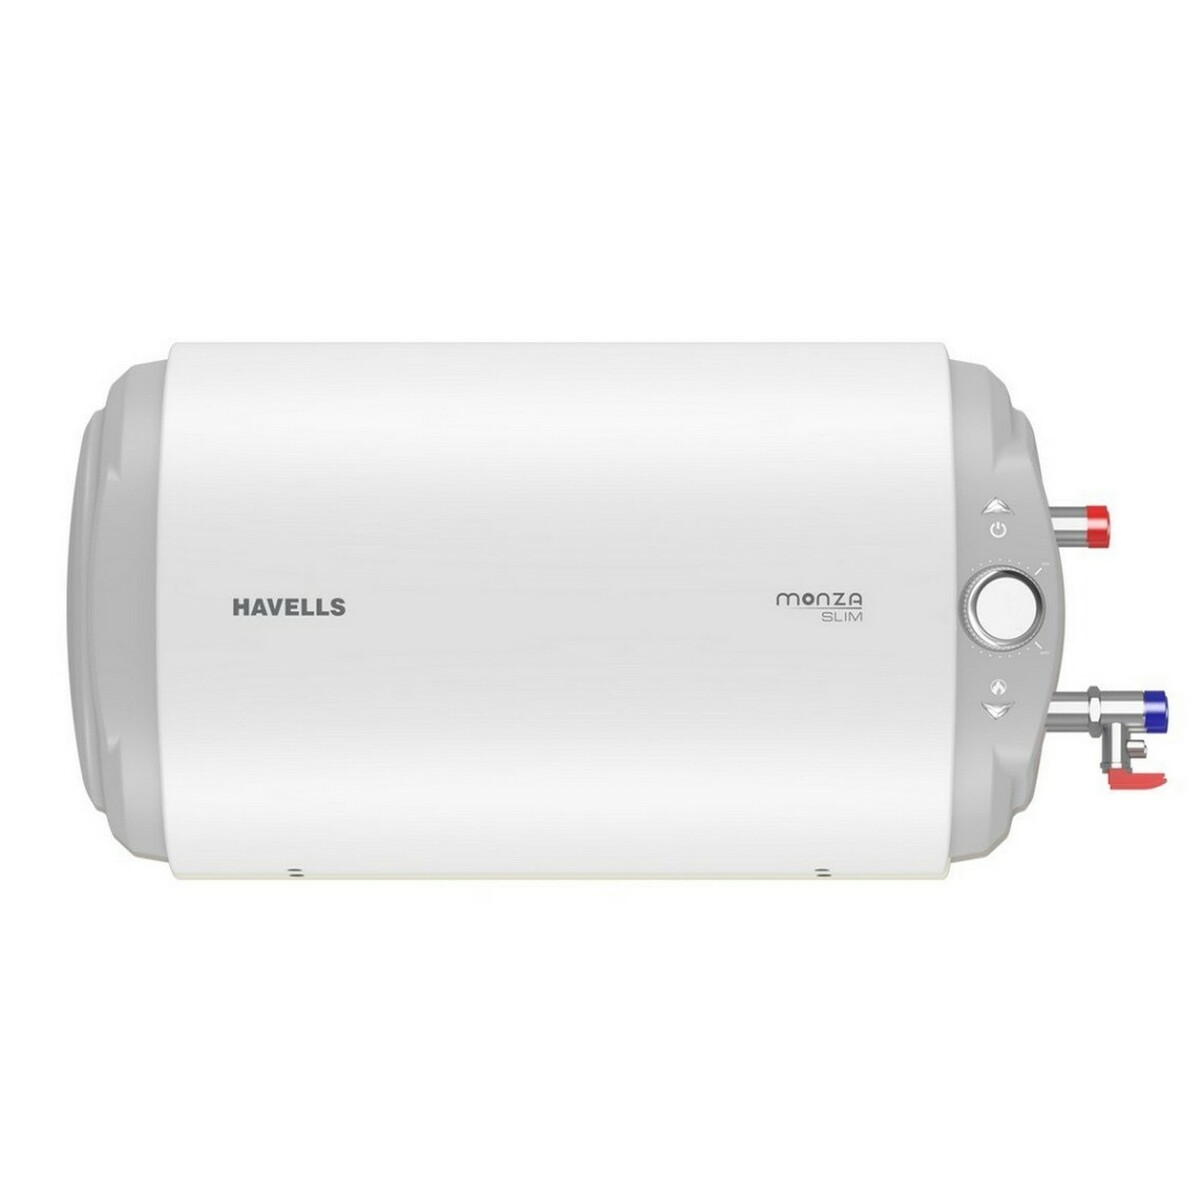 Havells Water Heater Monza 10Ltr White